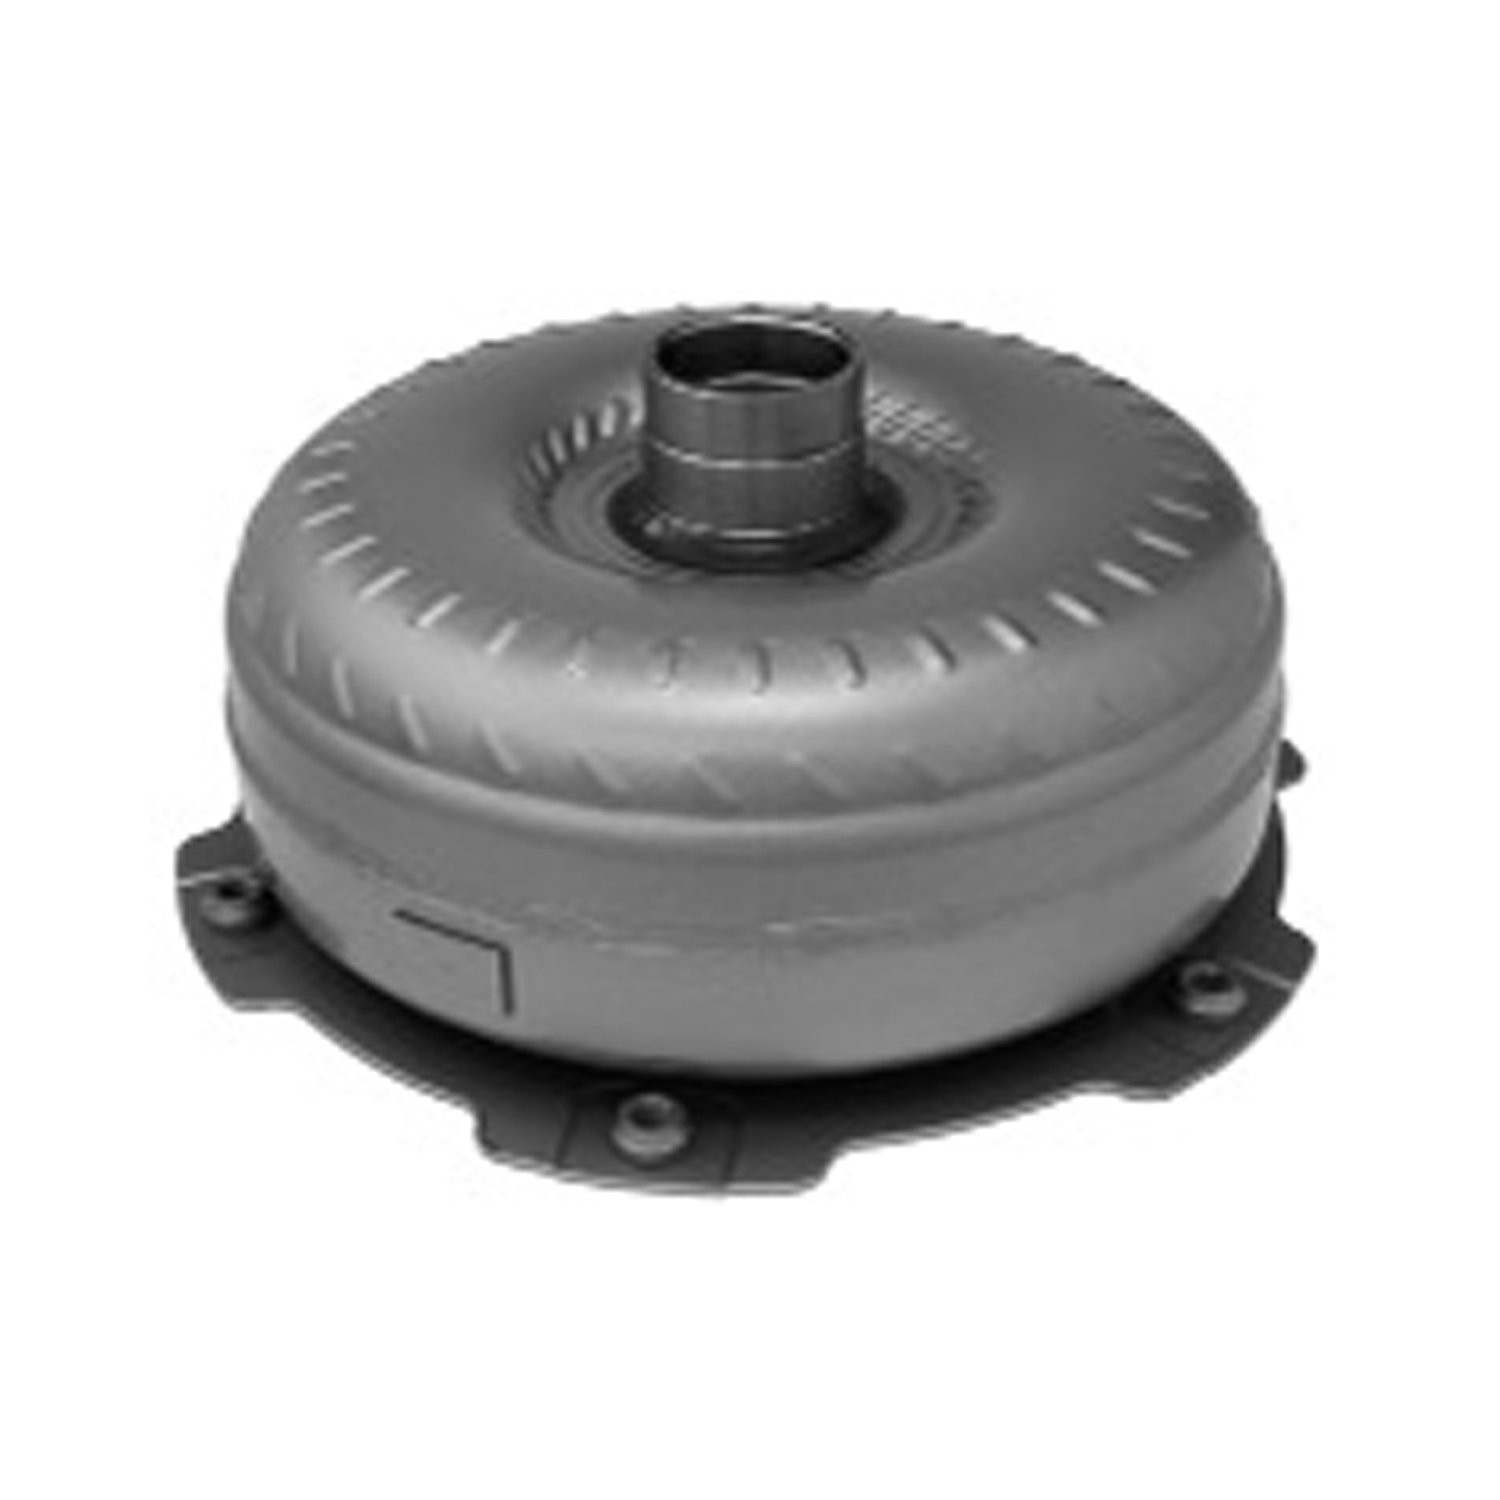 Remanufactured Automatic Transmission Torque Converter for GM 8L90 5.3 15-21